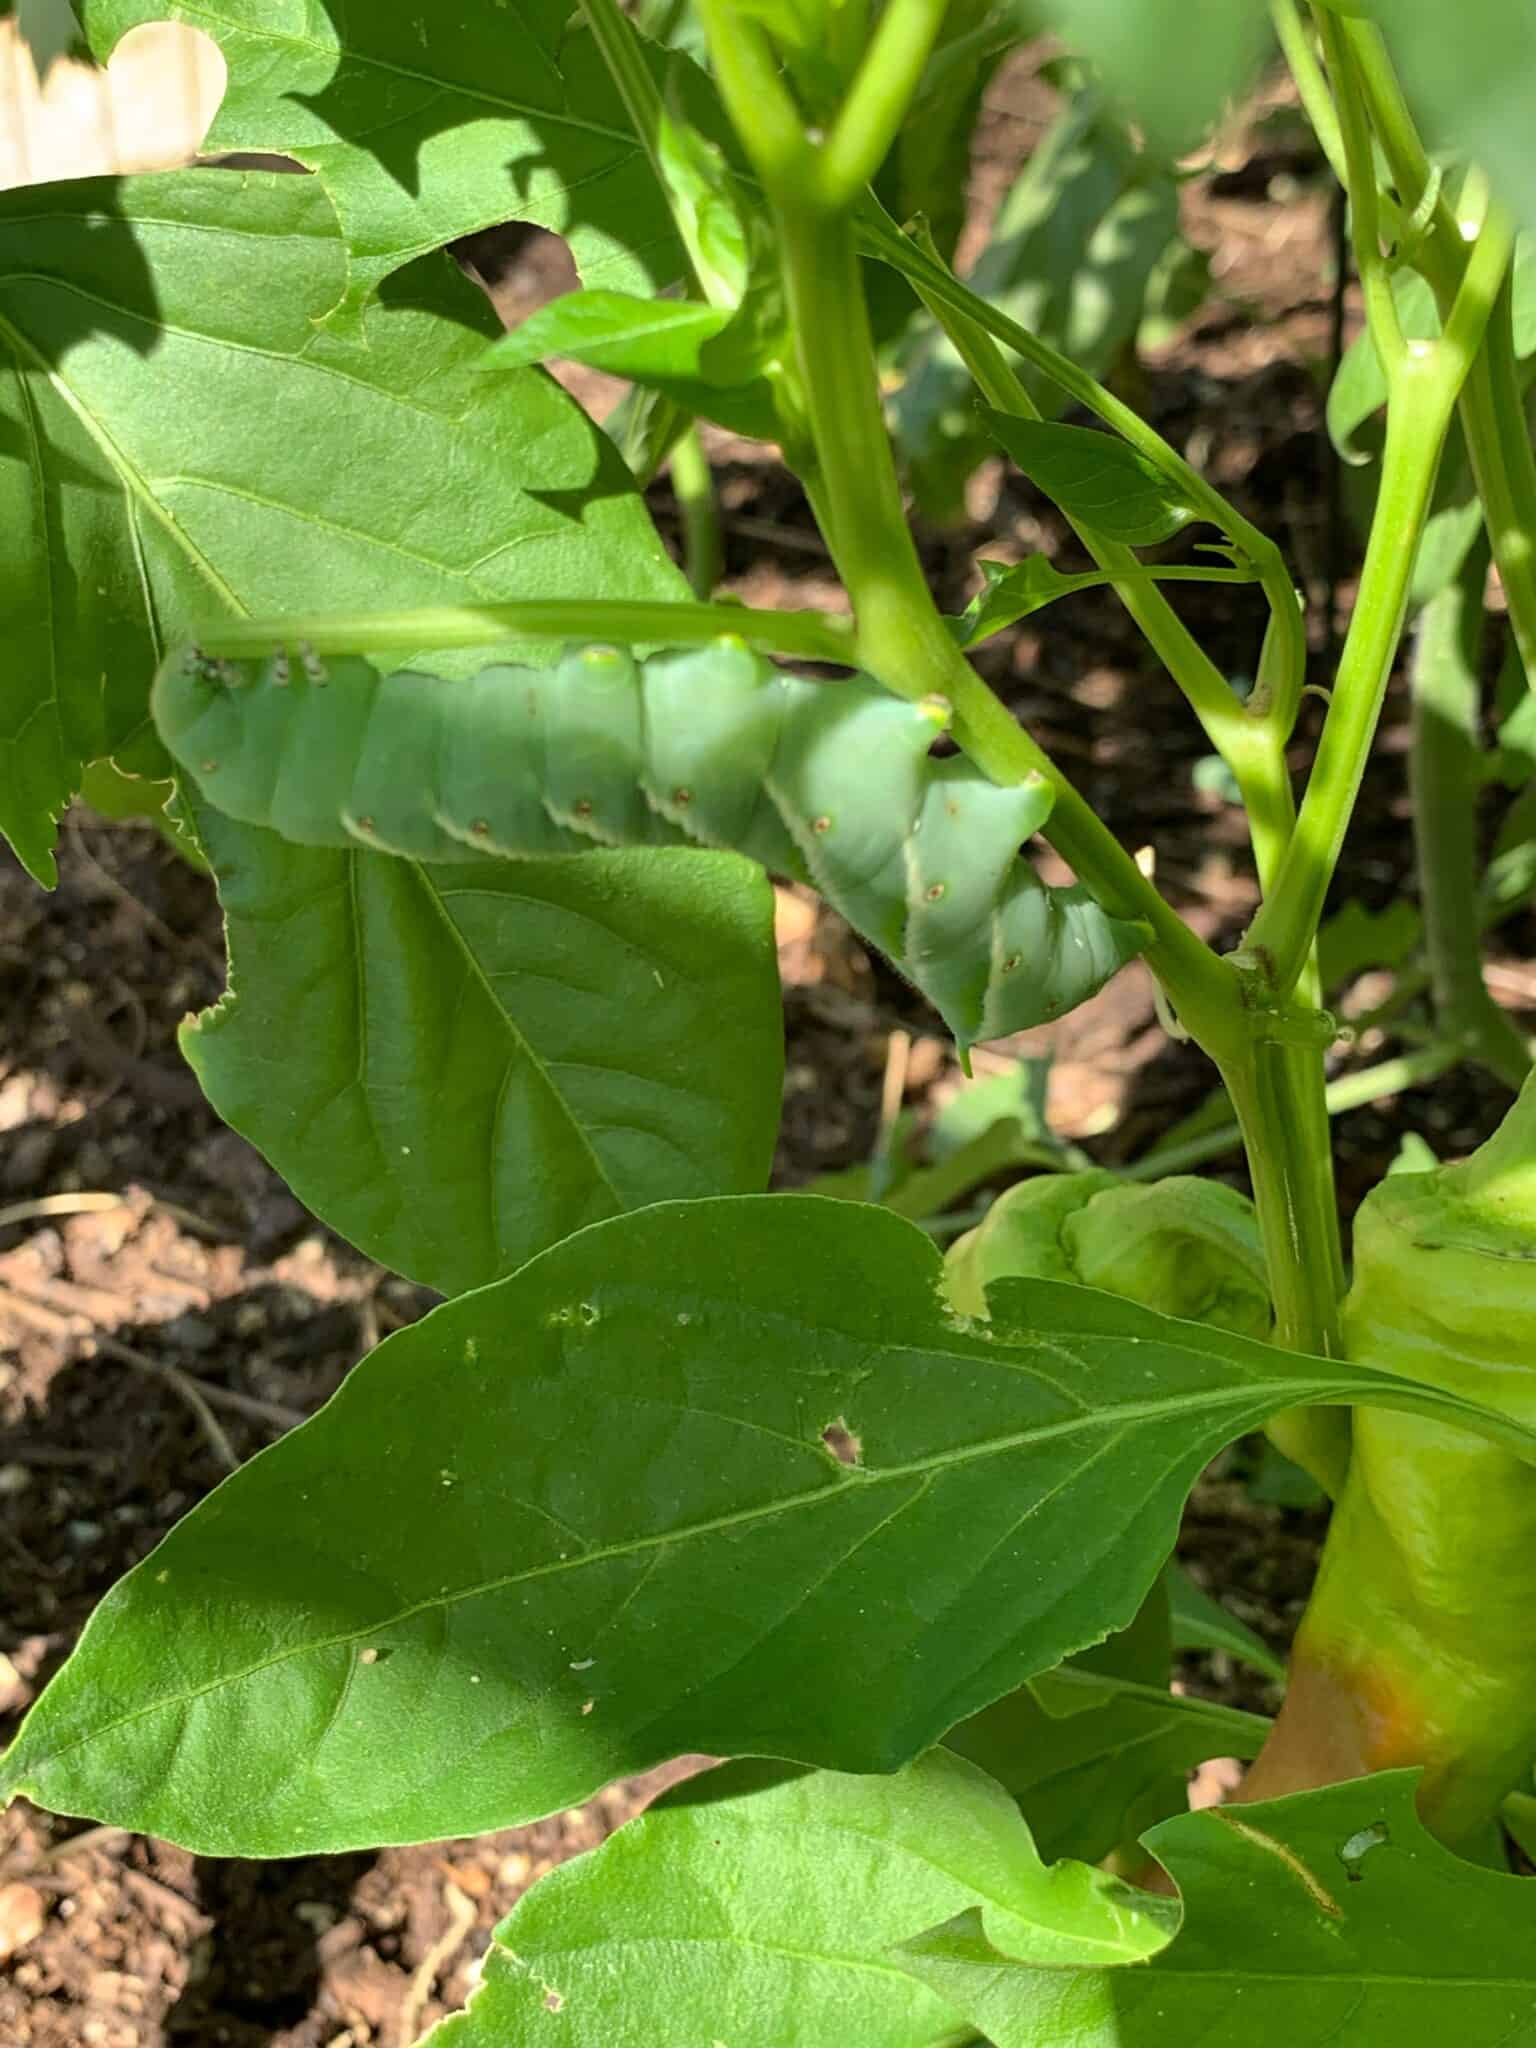 How to Get Rid of Tomato Hornworms | Rural Living Today